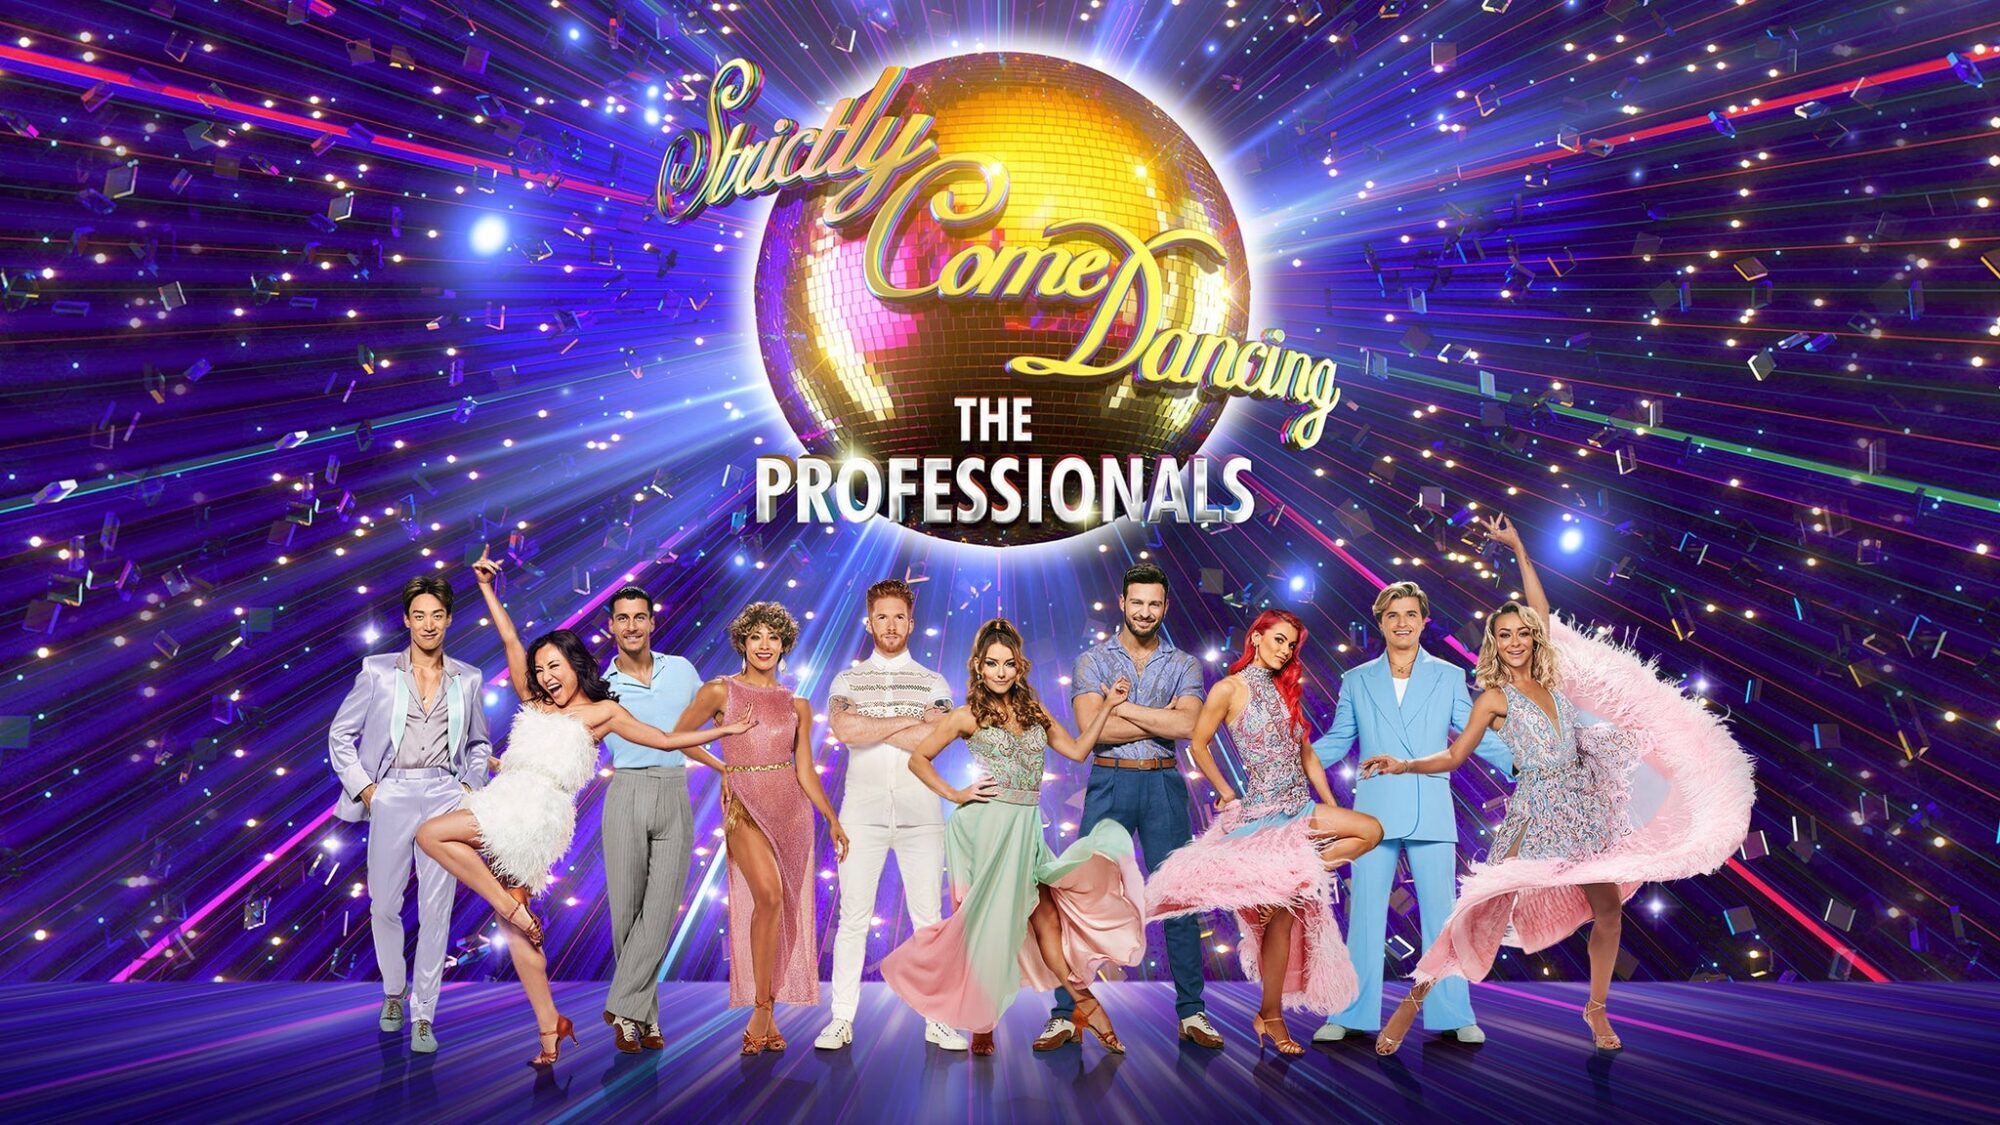 Image name Strictly Come Dancing the Professionals 2023 at Sheffield City Hall Oval Hall Sheffield the 18 image from the post Strictly Come Dancing the Professionals 2023 at York Barbican, York in Yorkshire.com.